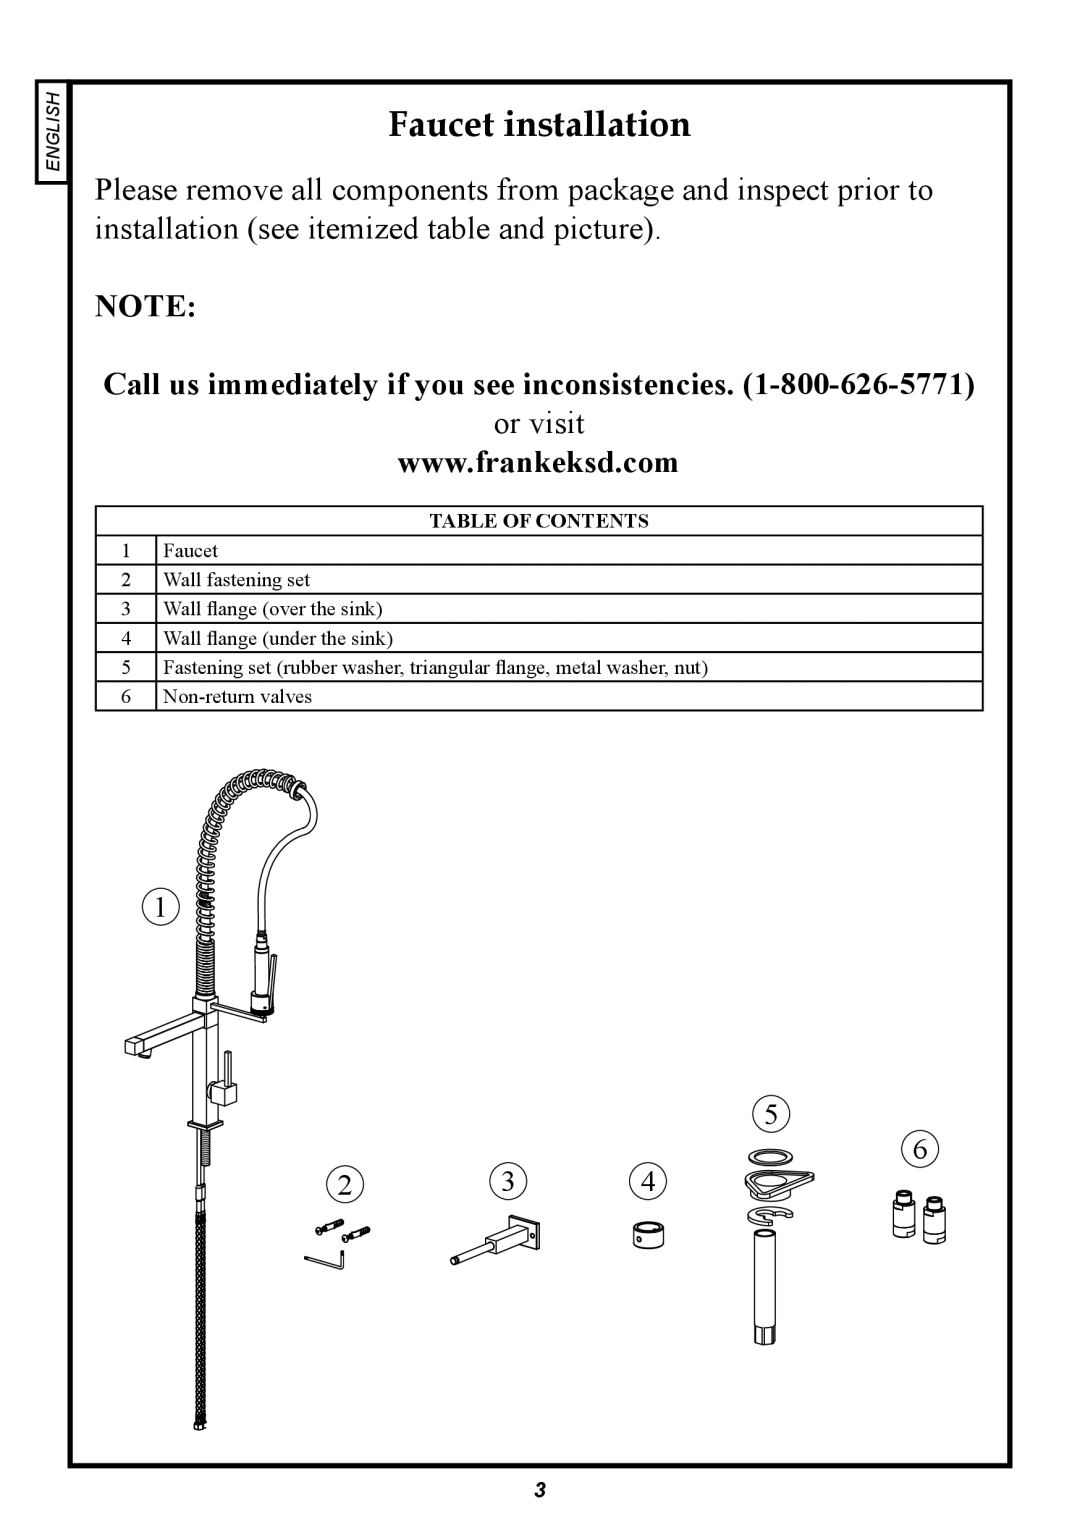 Franke Consumer Products FFPD100 or visit, Faucet installation, Call us immediately if you see inconsistencies, English 